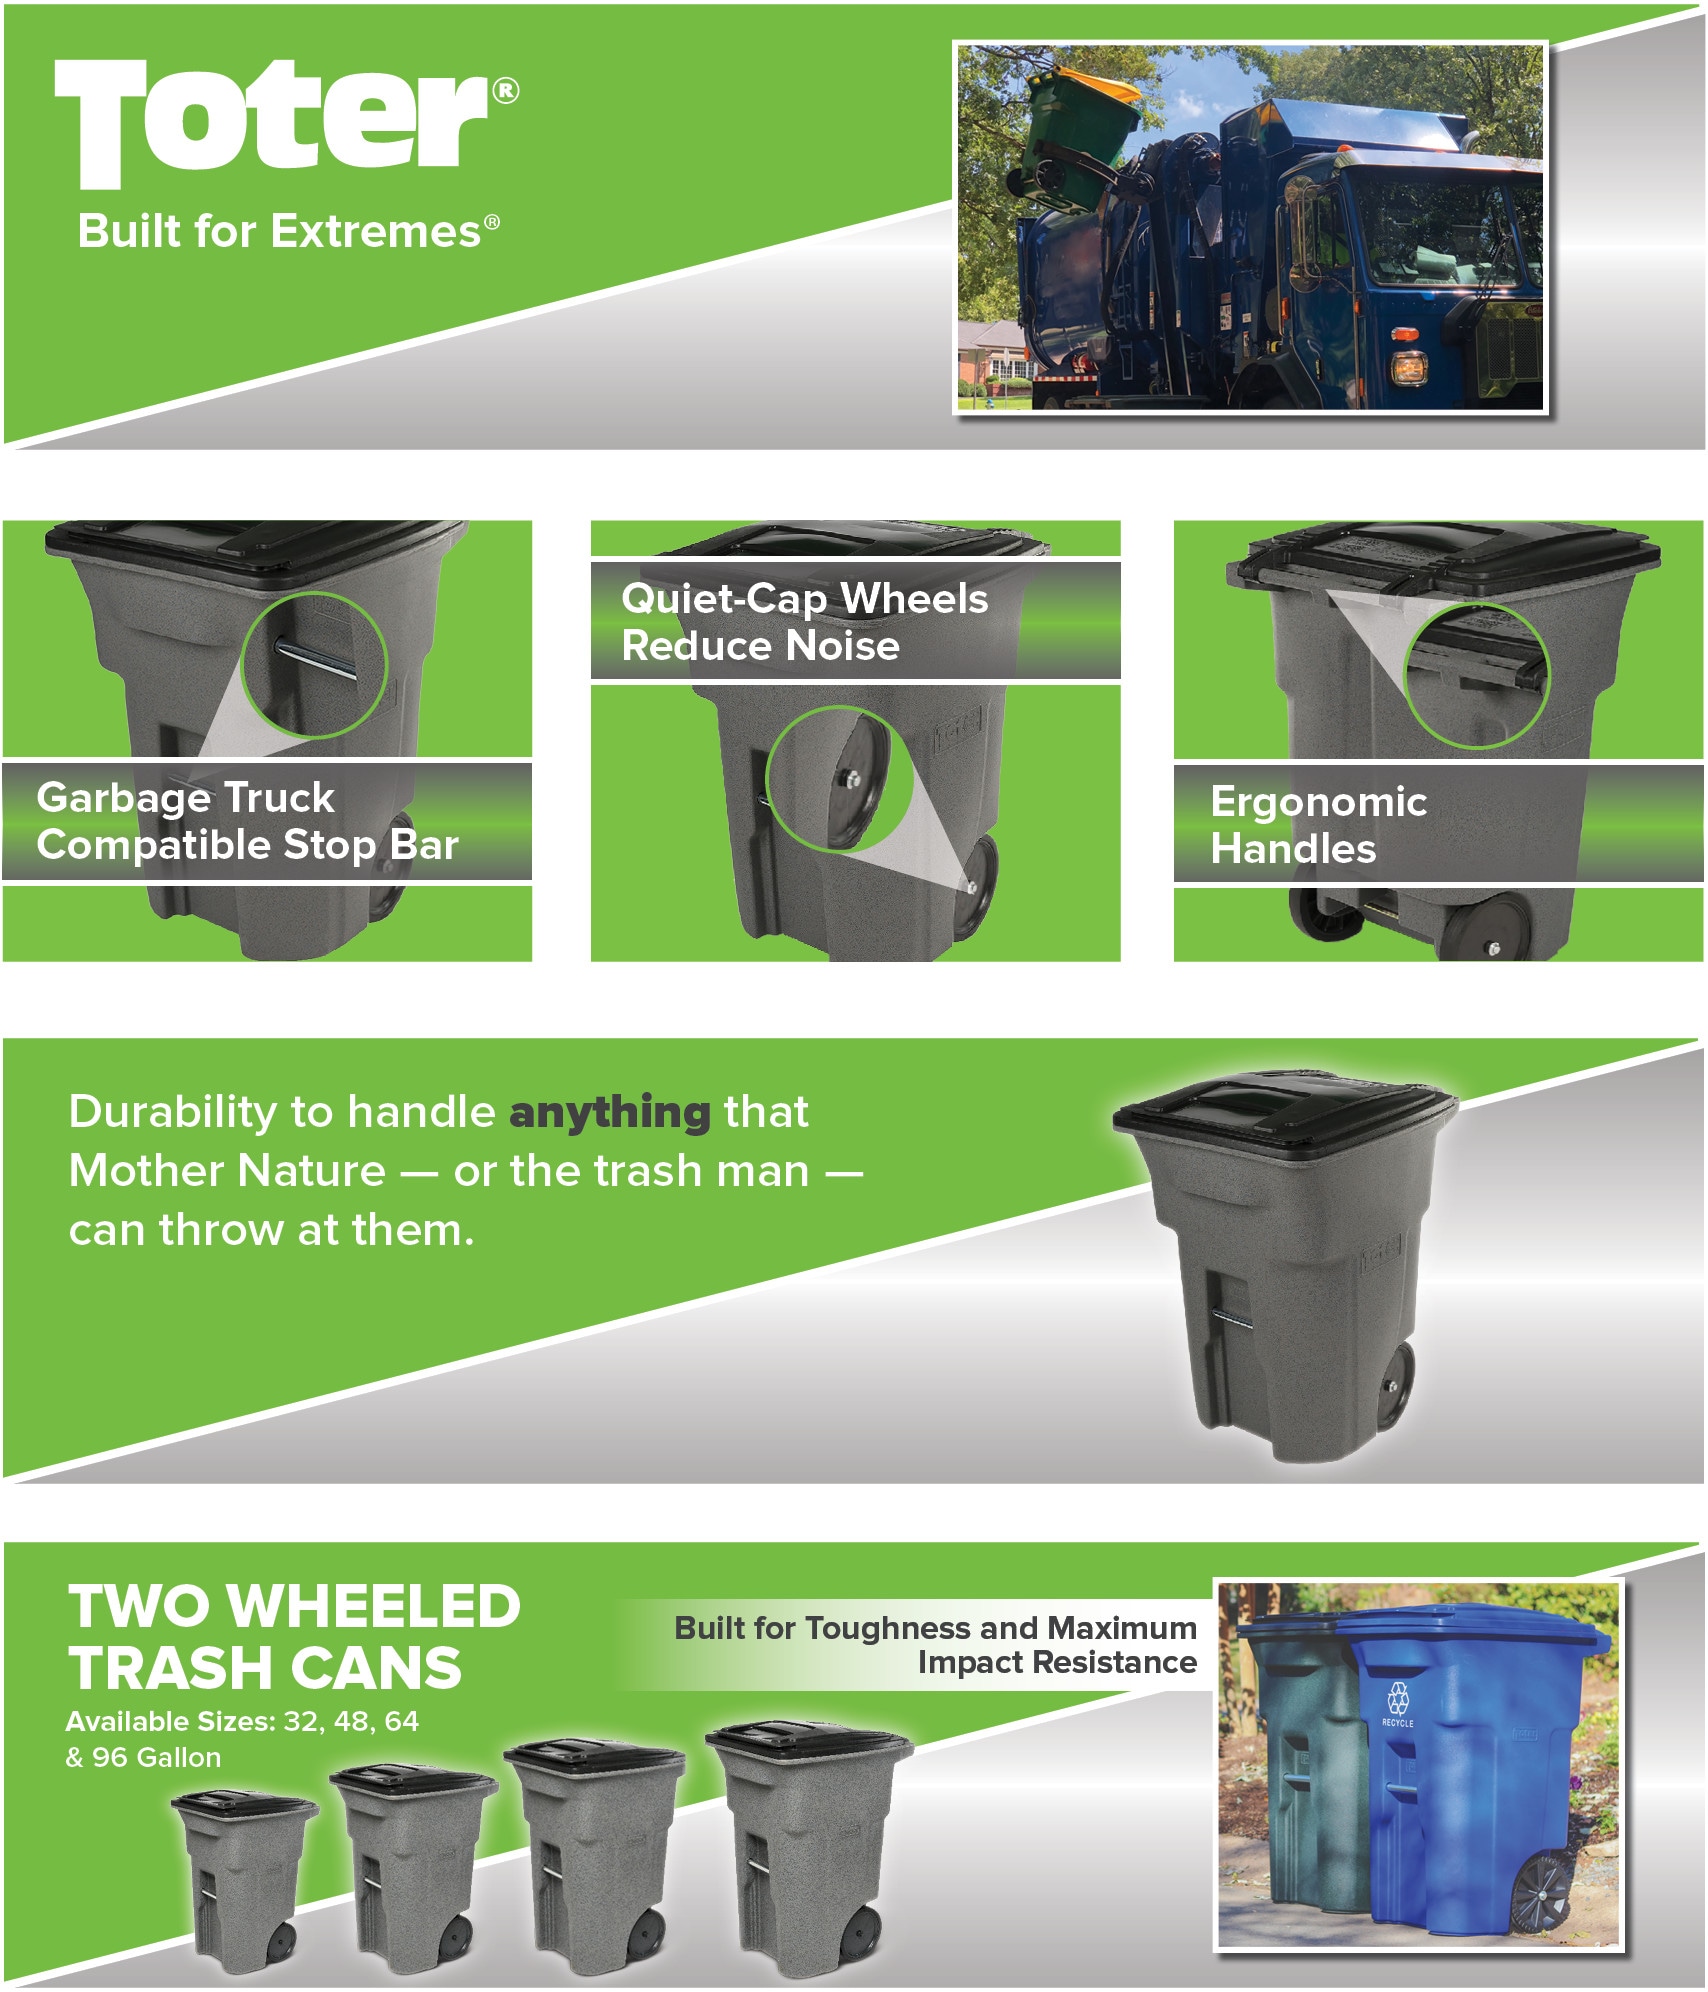 News 3 Midday: New 96-gallon trash cans and automated system